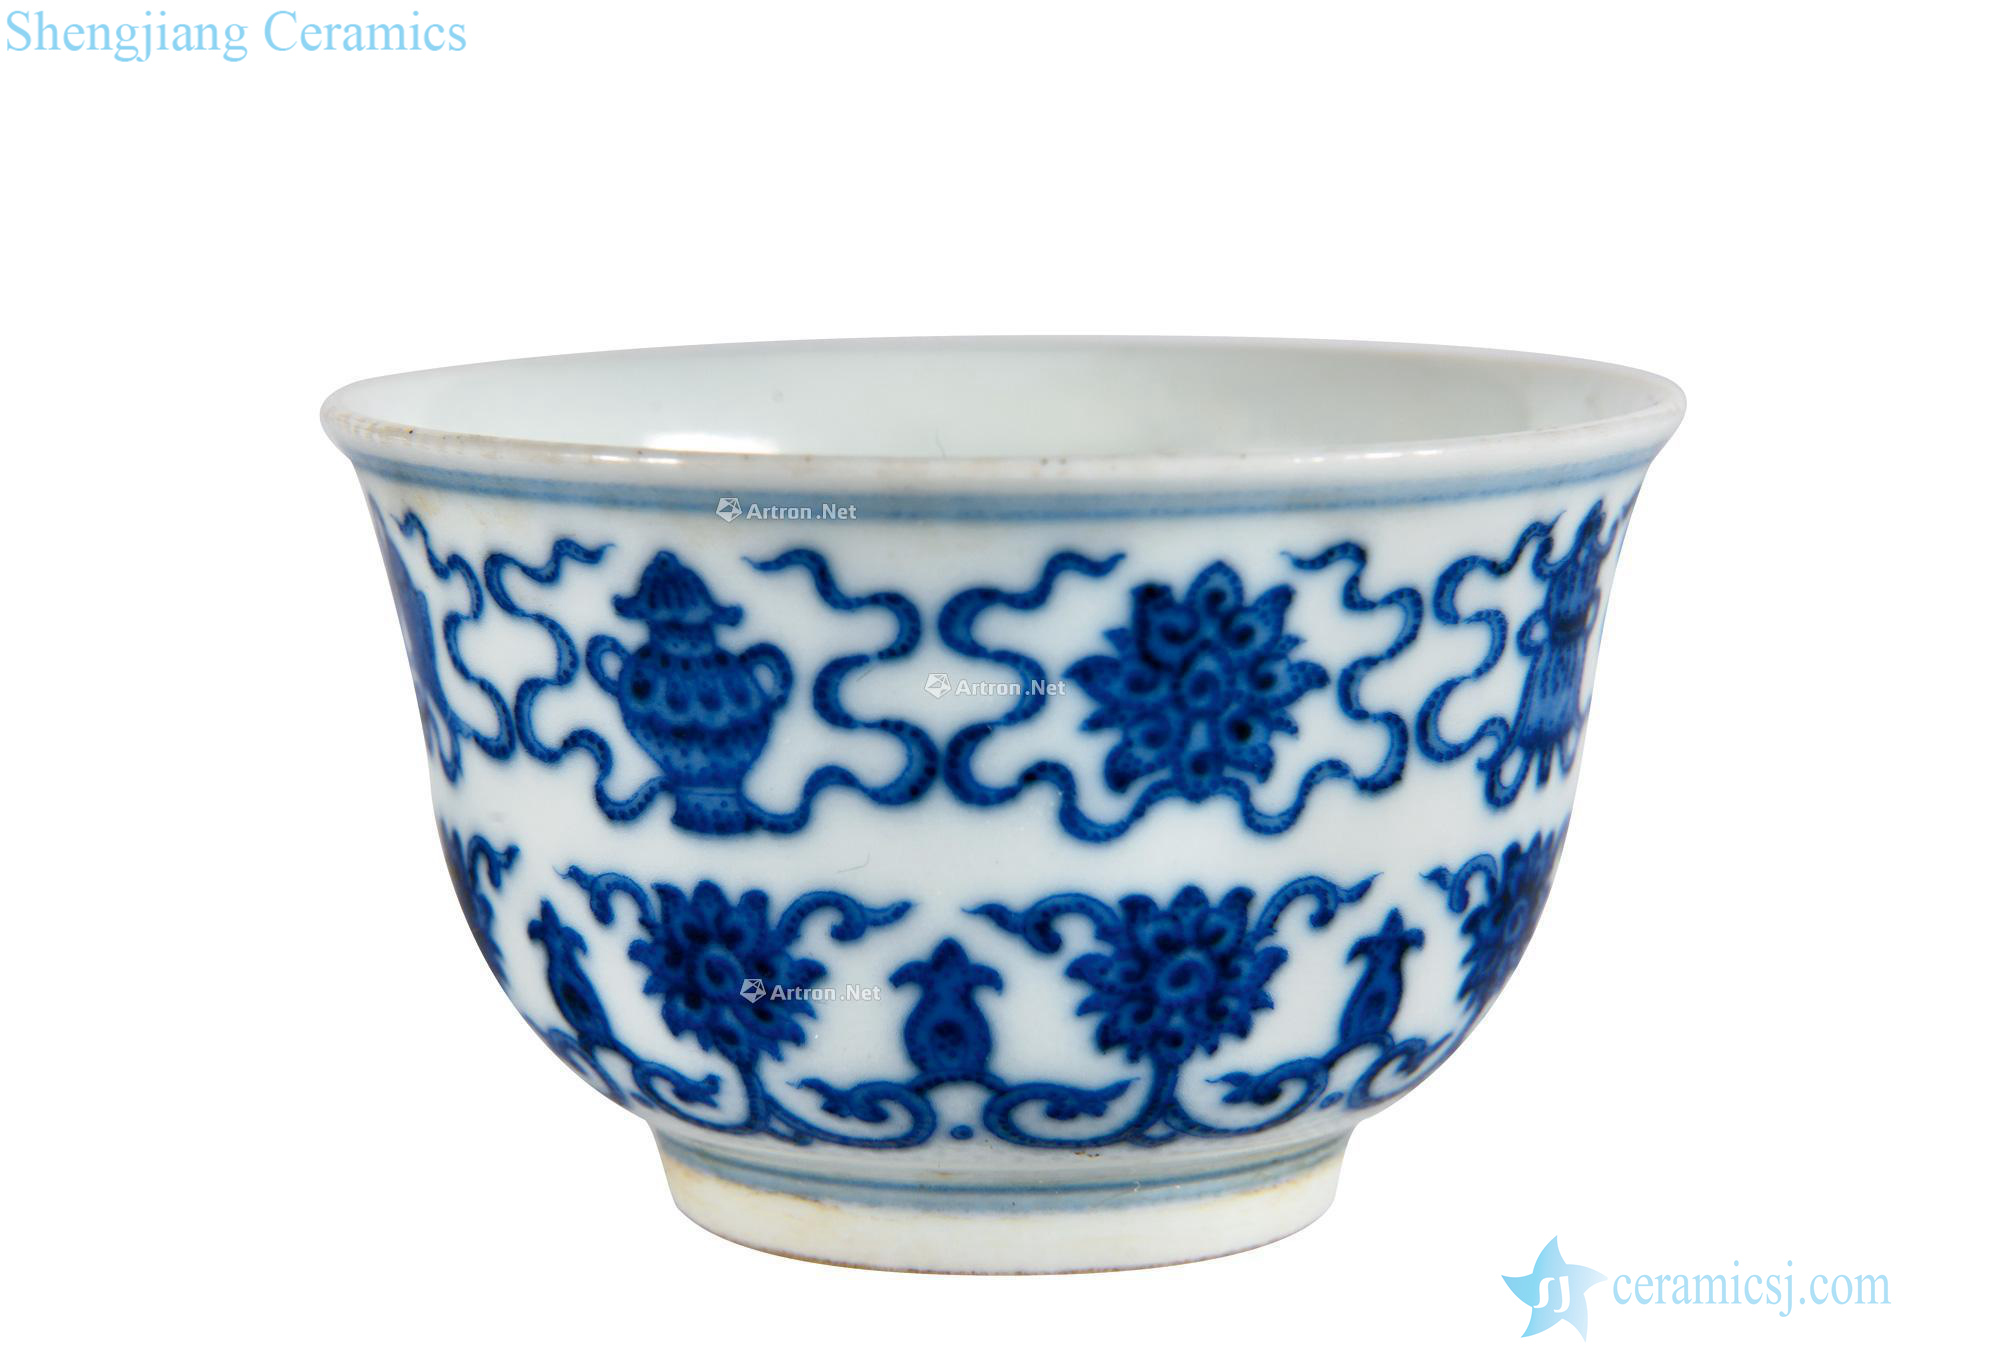 Qing daoguang Eight auspicious pattern of blue and white cup